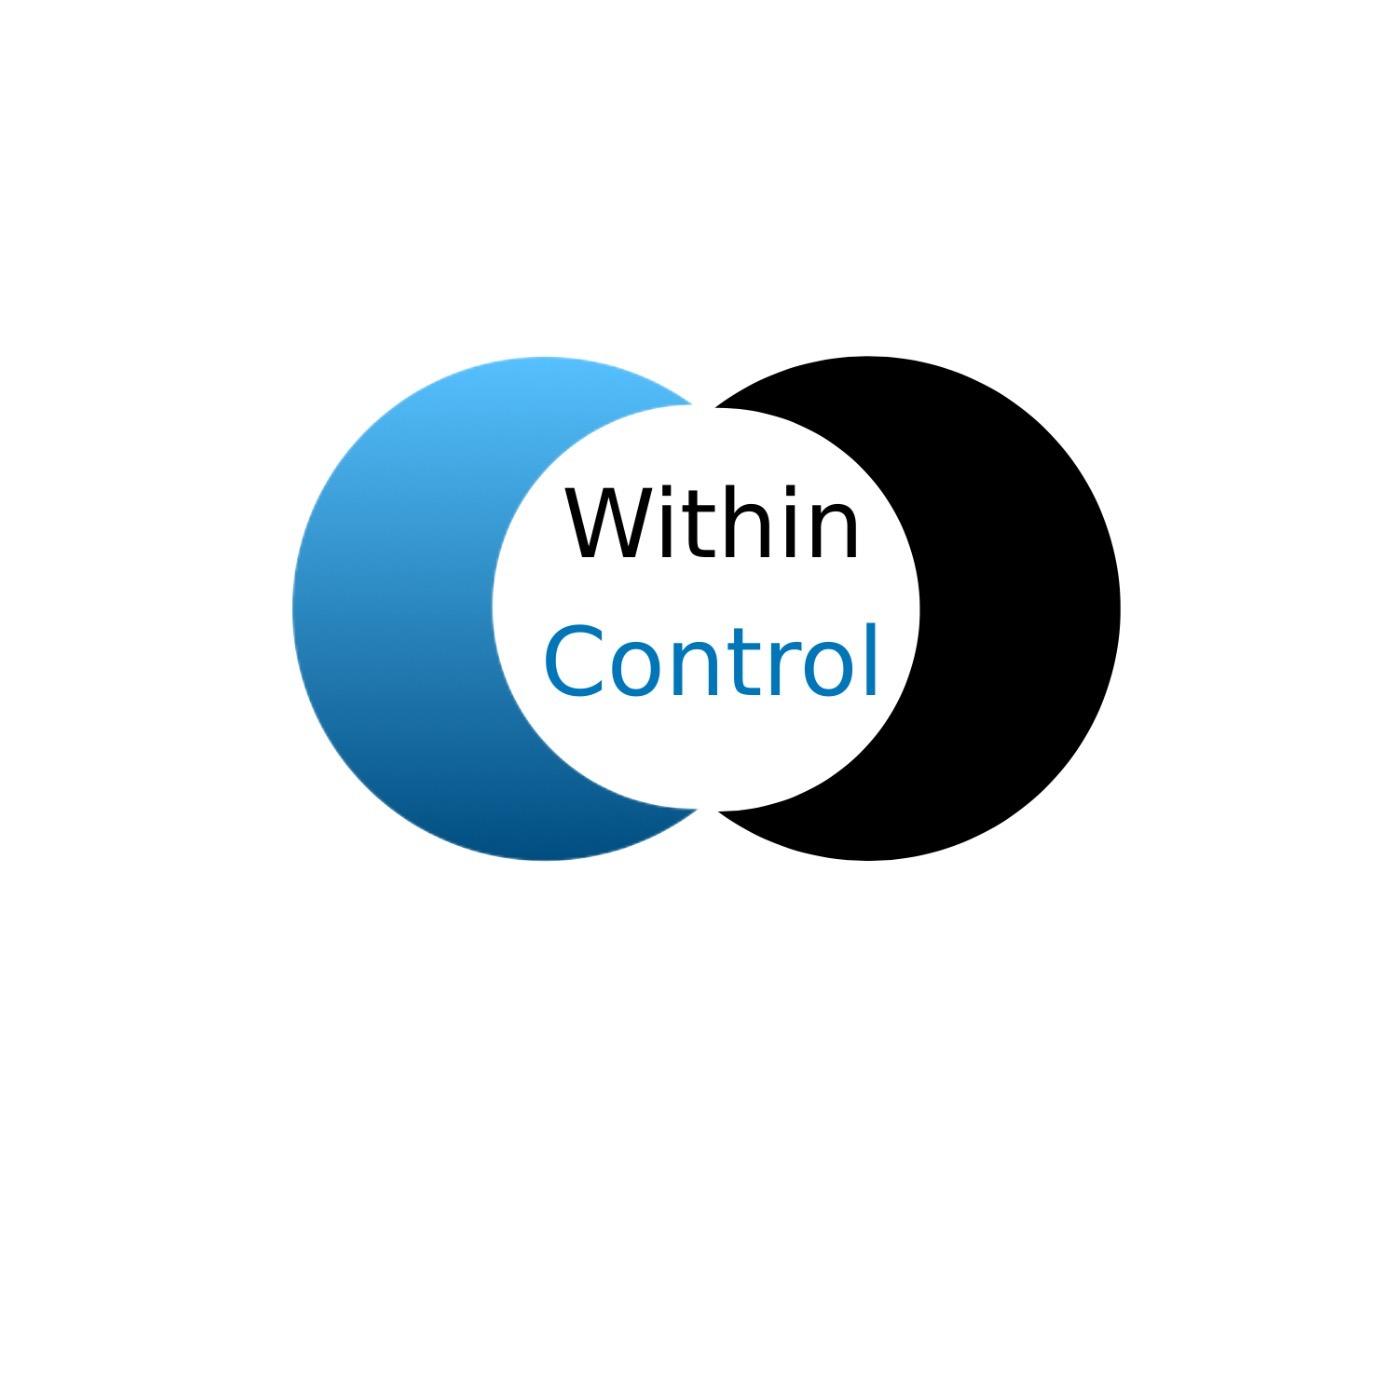 WITHIN CONTROL